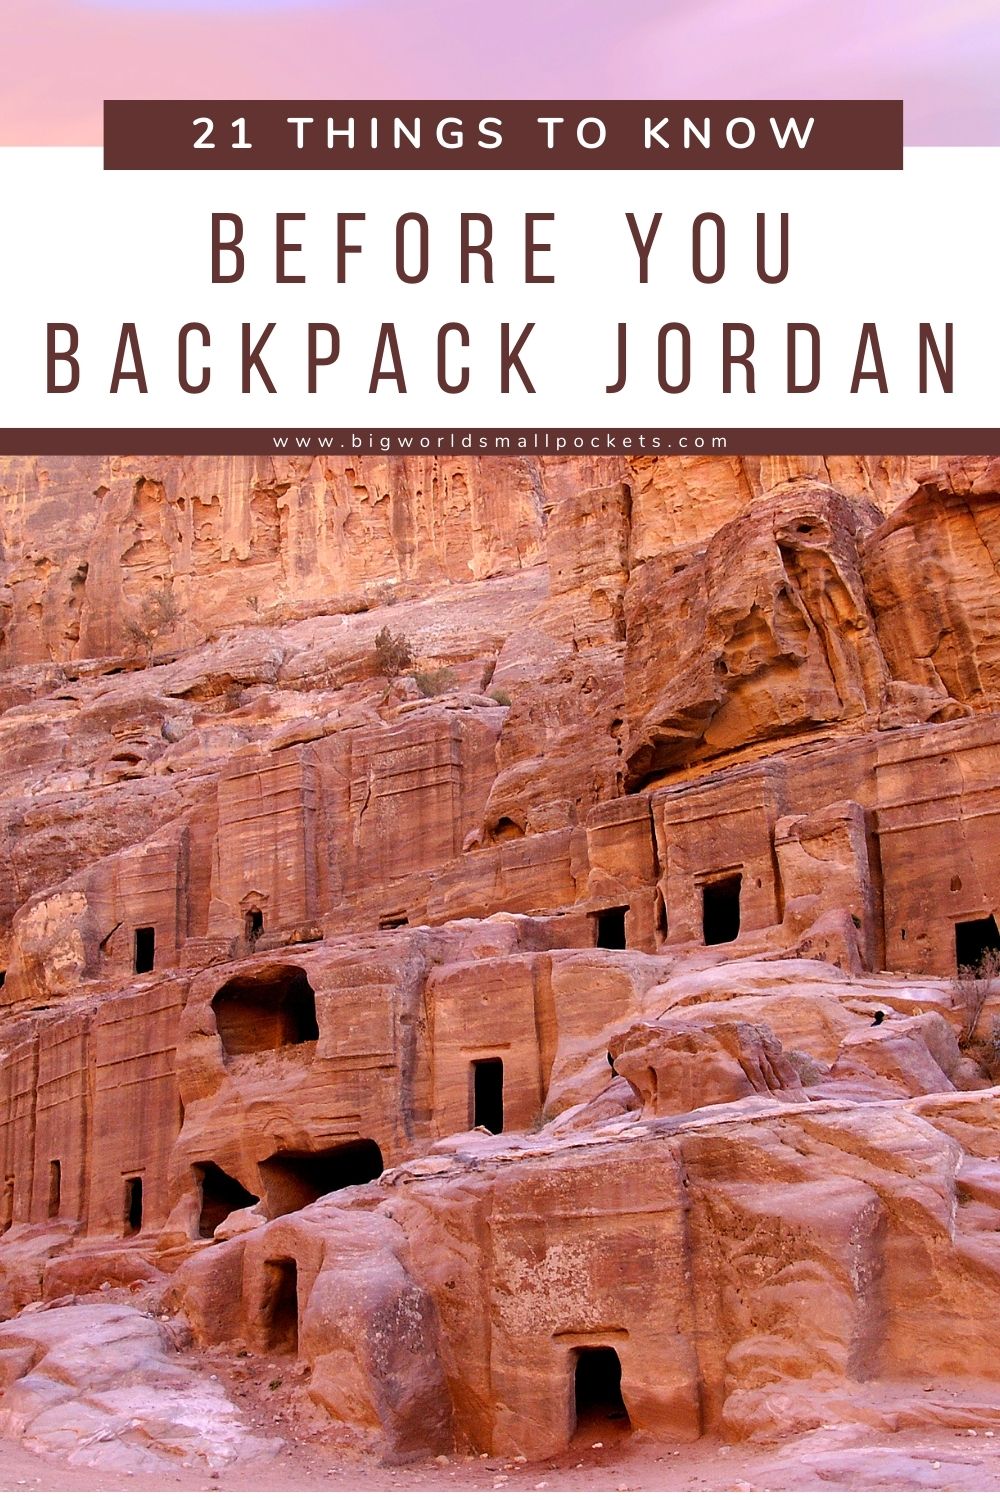 21 Things to Know Before You Backpack Jordan